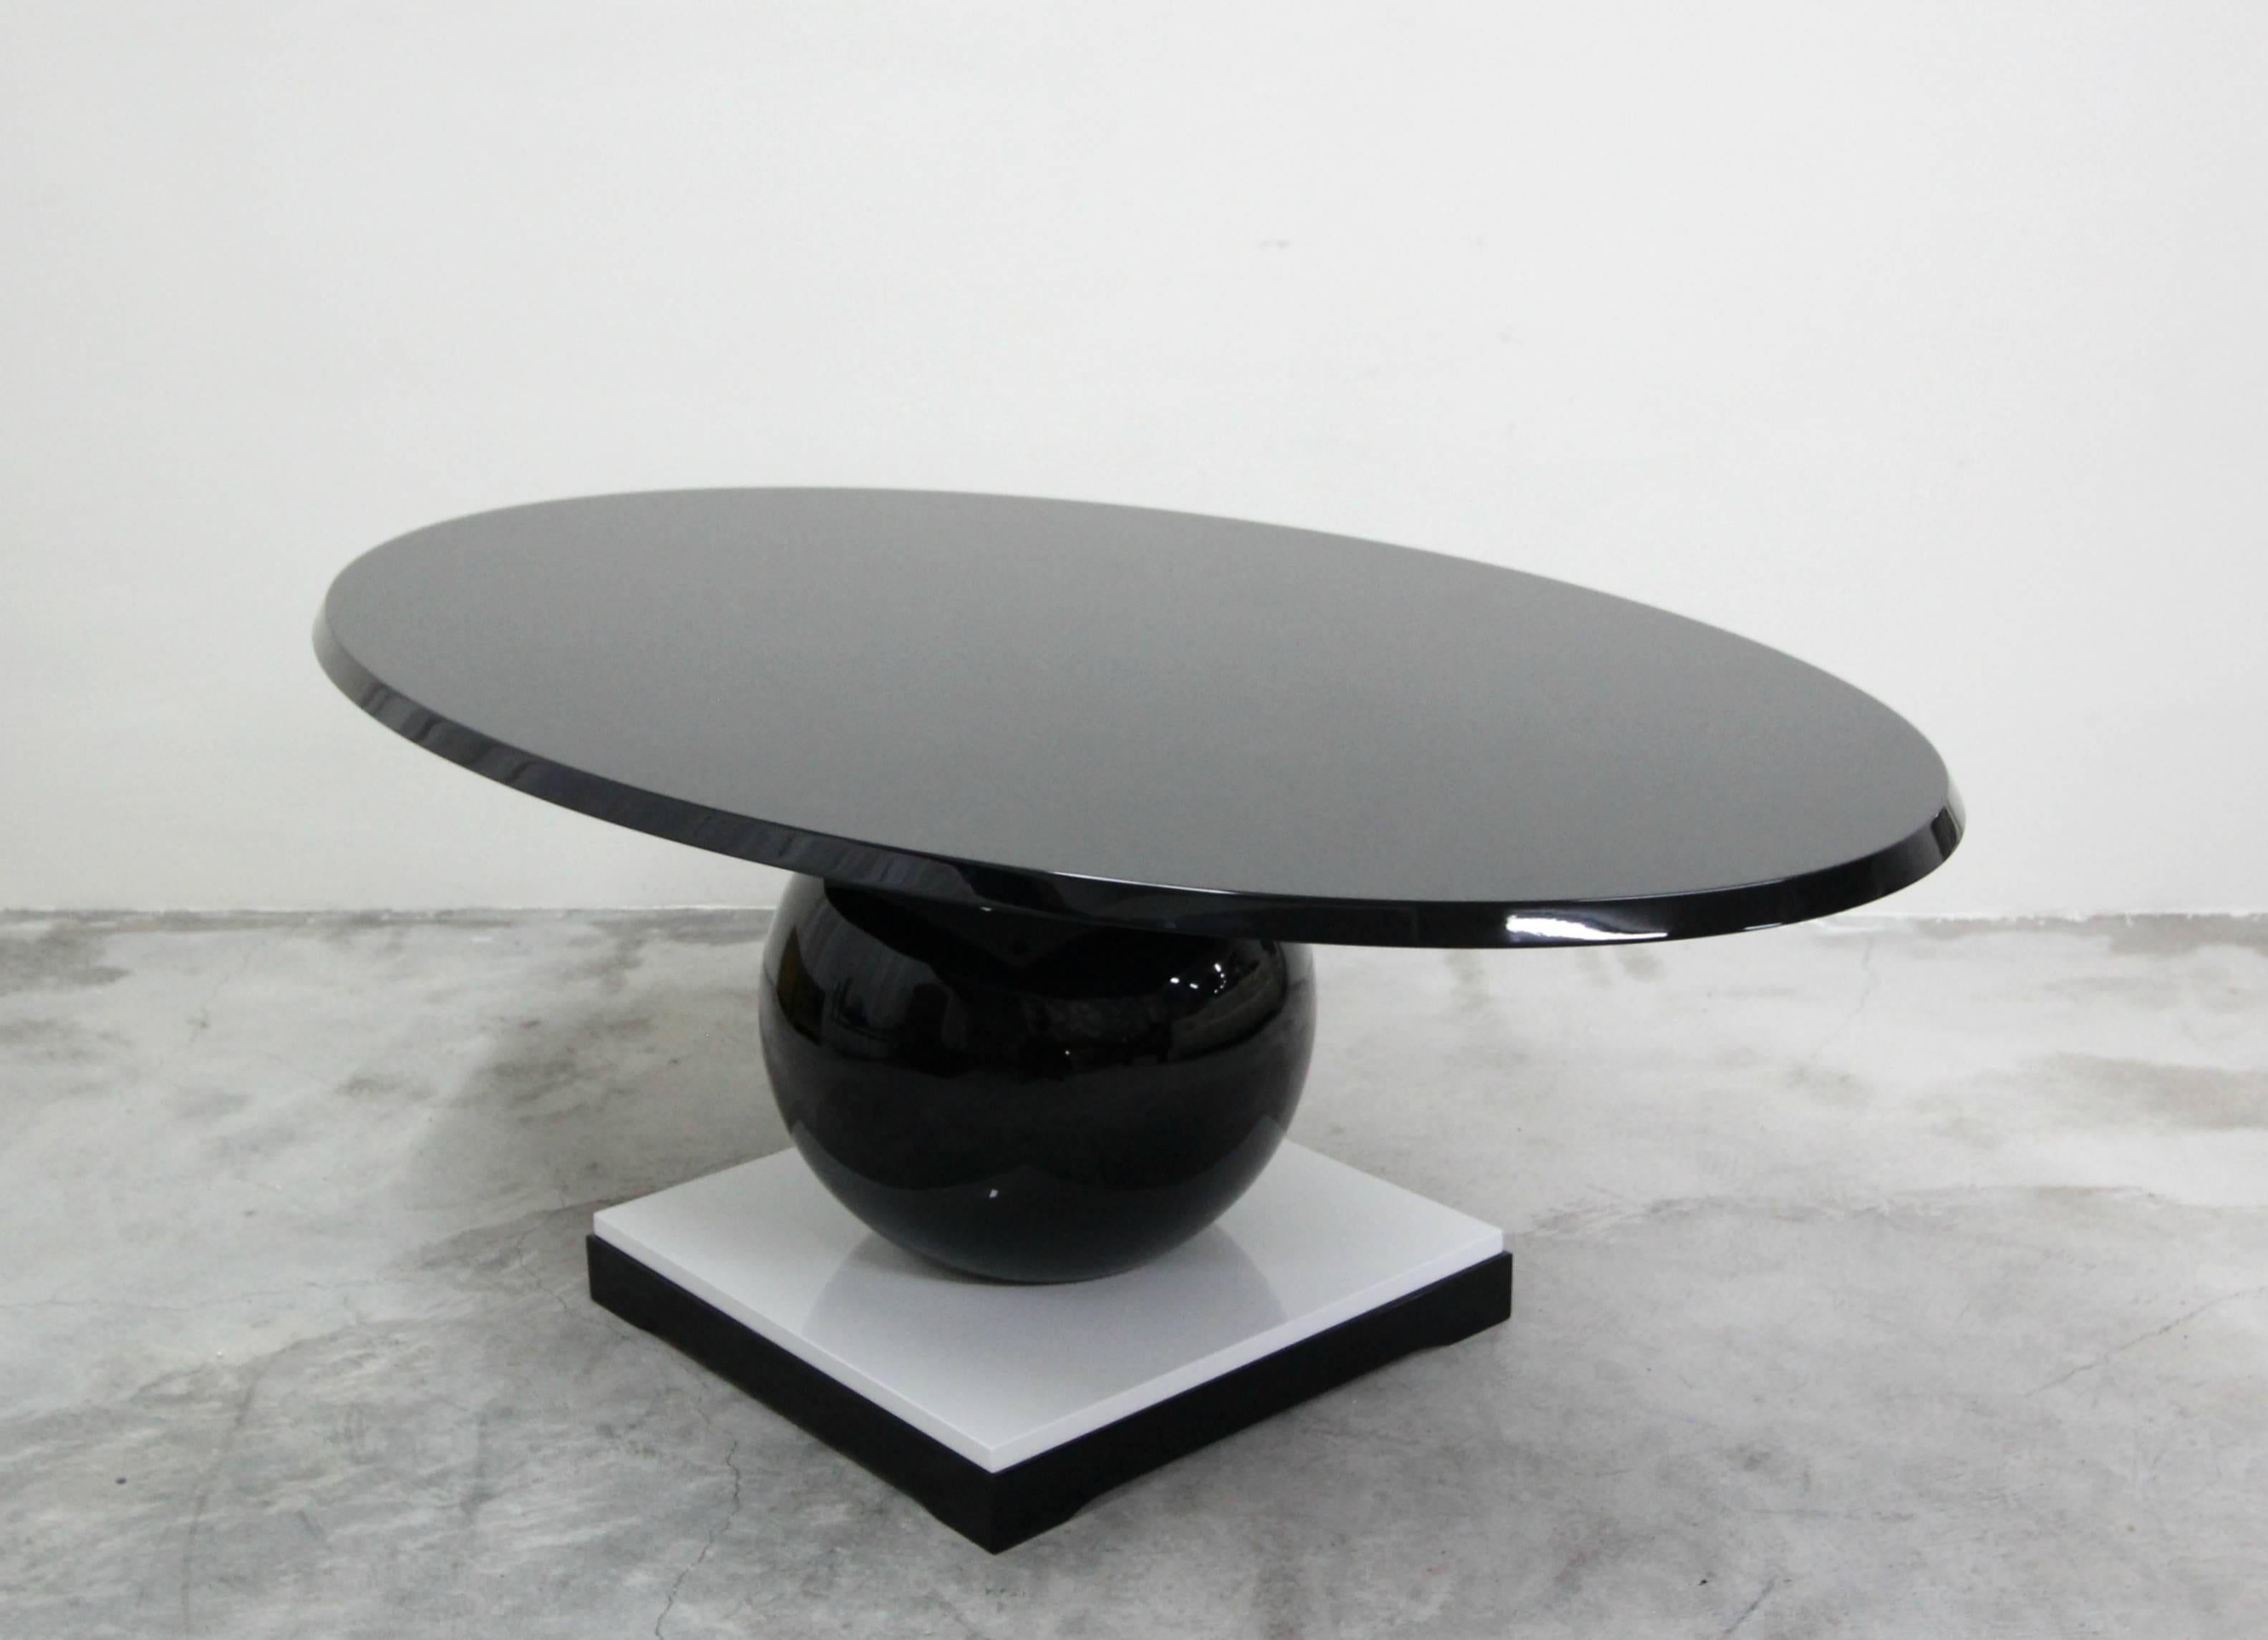 20th Century French Contemporary Lacquered Oval Dining Table by Jacques-Henri Lartigue, 1918